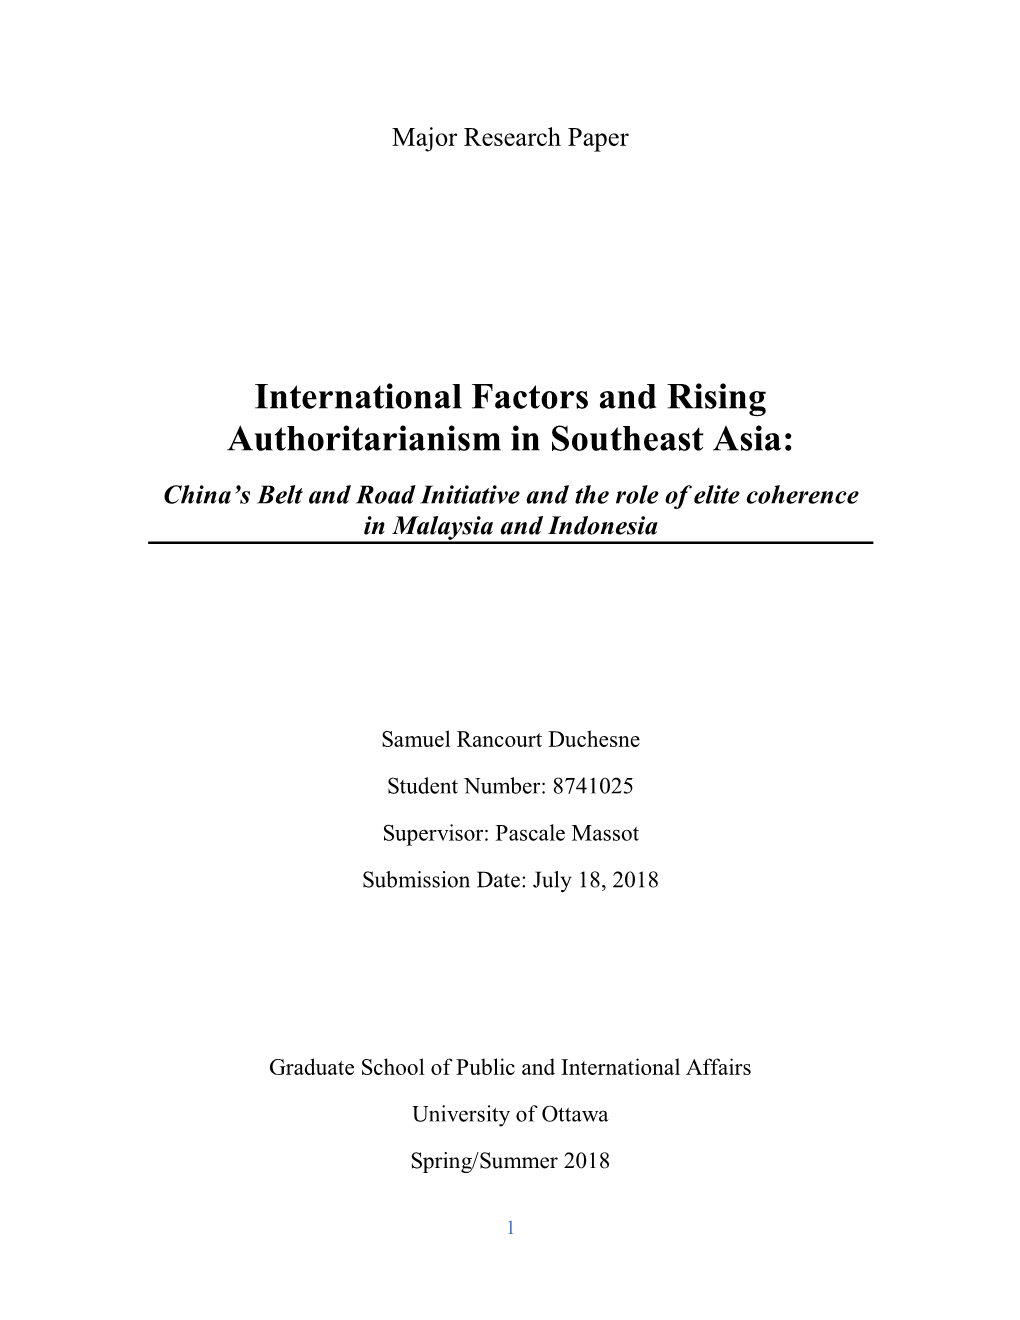 International Factors and Rising Authoritarianism in Southeast Asia: China’S Belt and Road Initiative and the Role of Elite Coherence in Malaysia and Indonesia